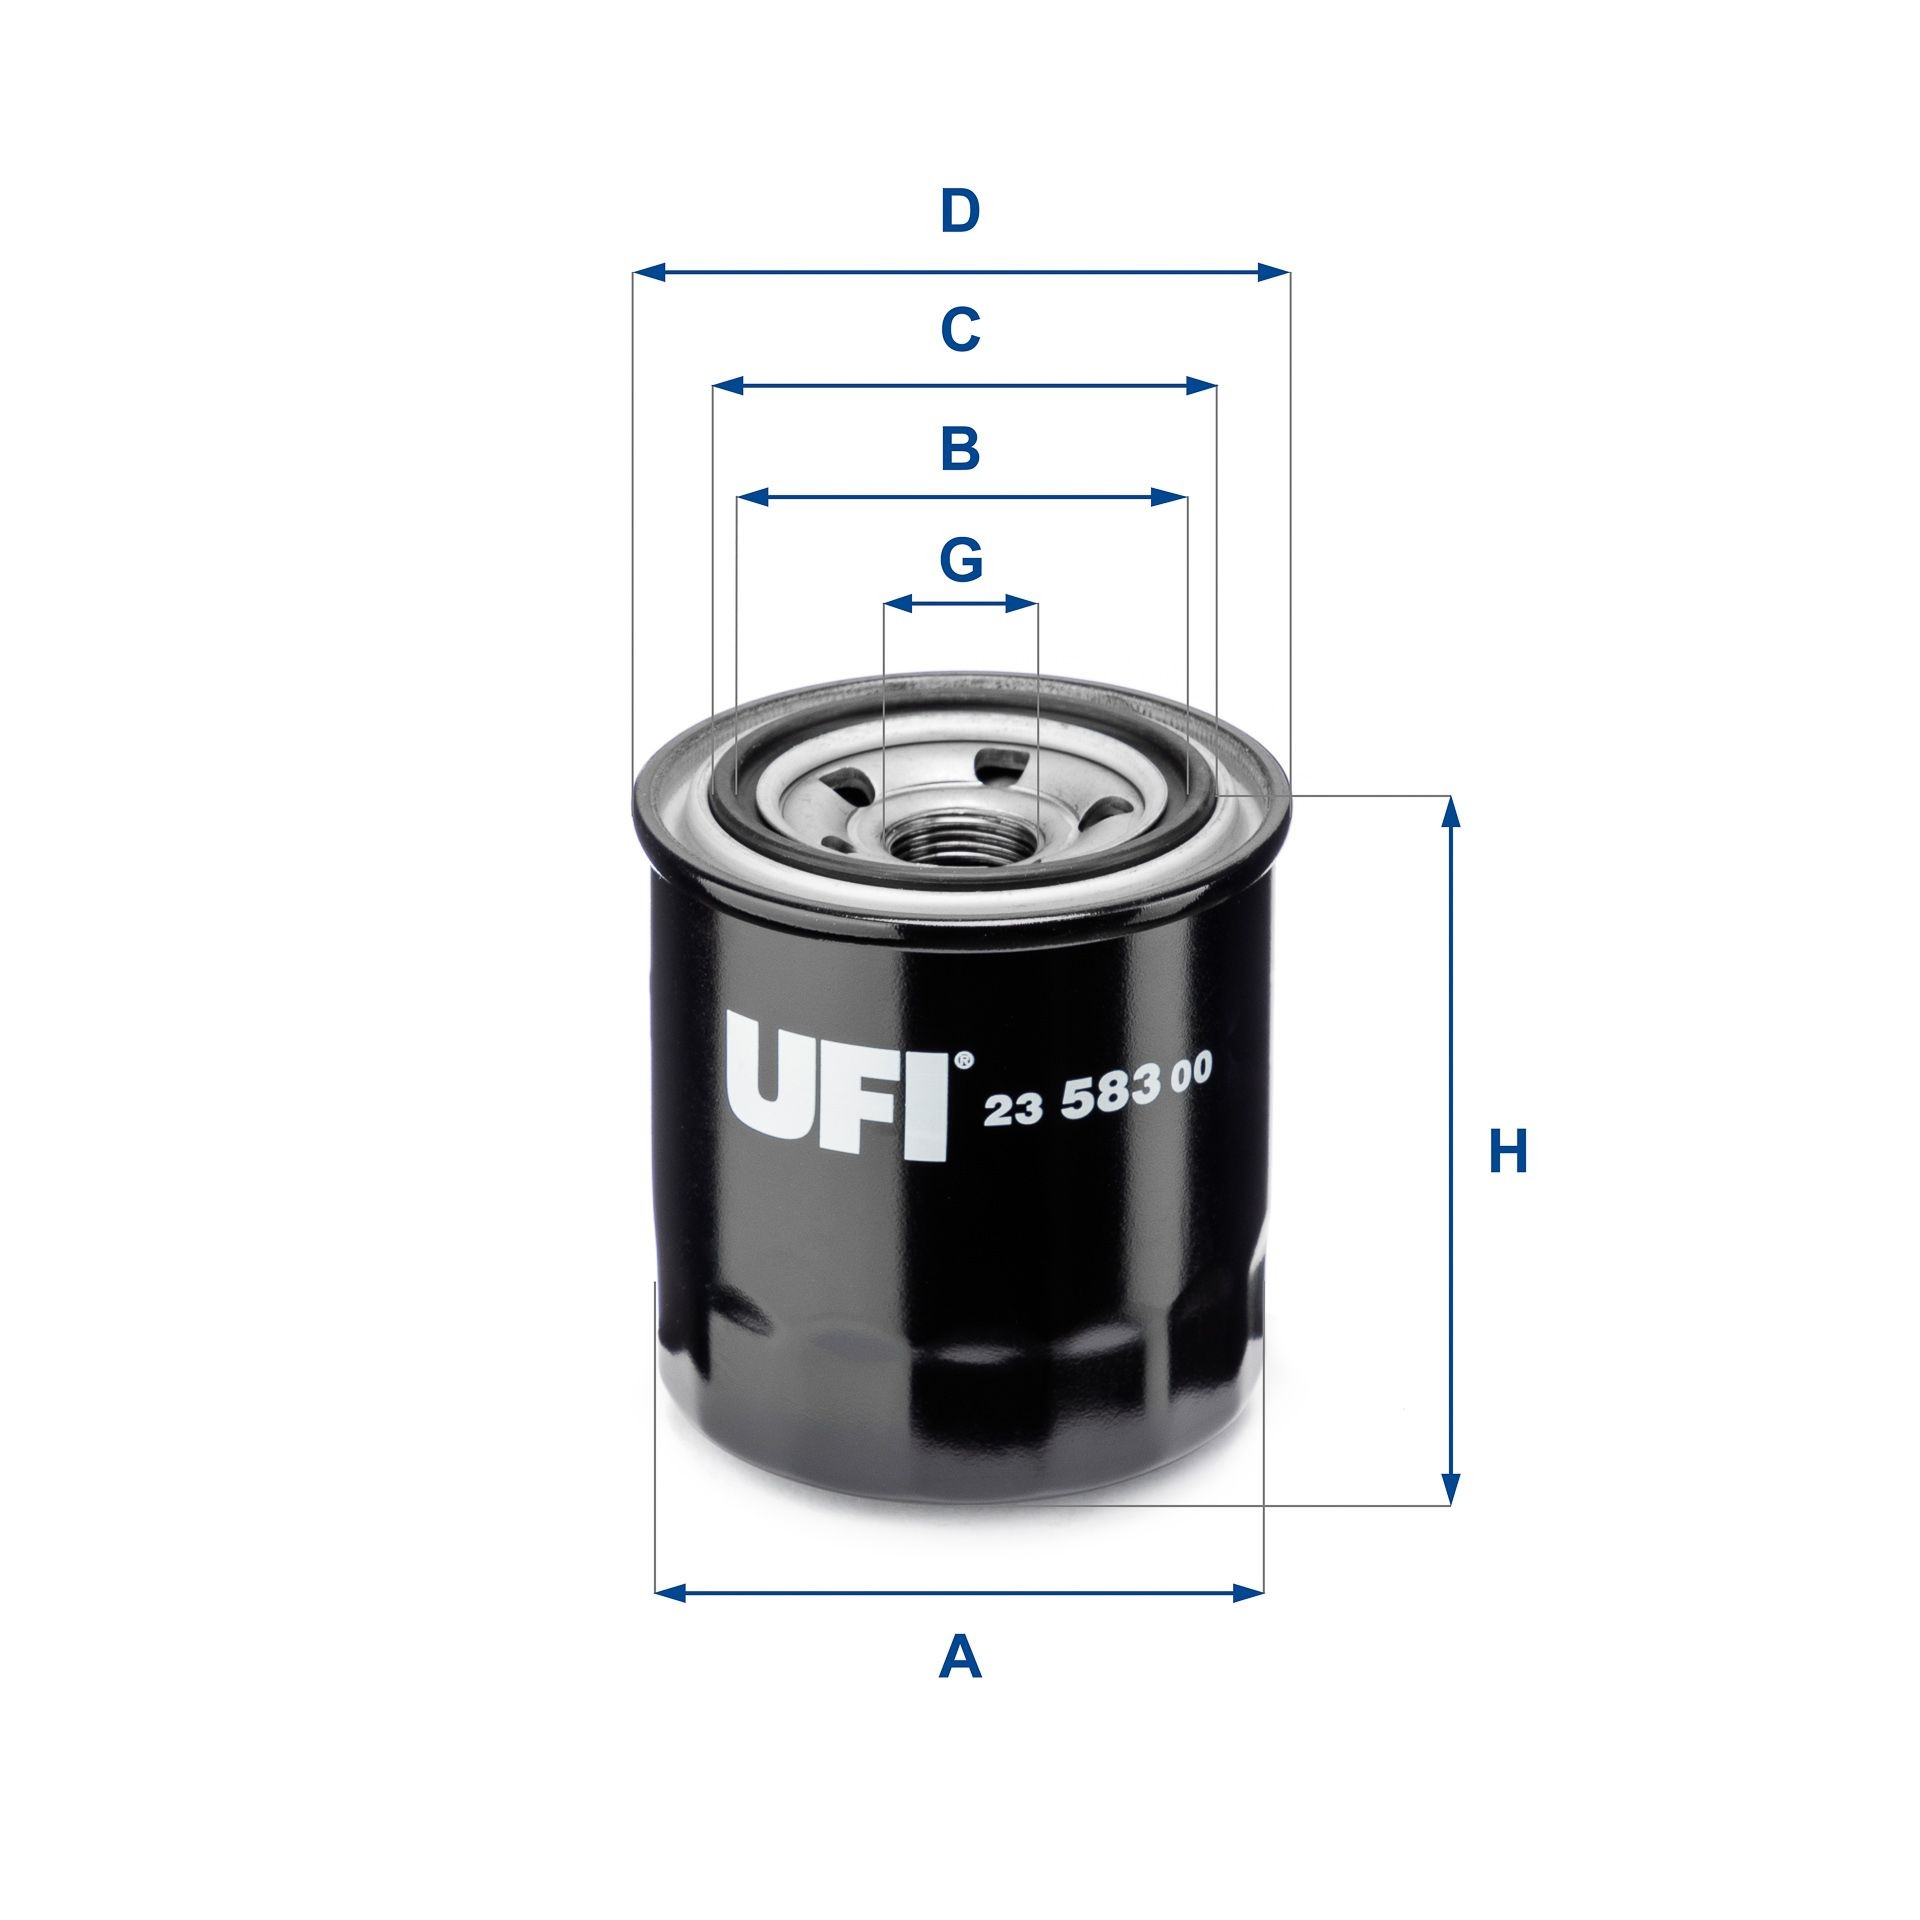 23.583.00 UFI Oil filters KIA M 20 X 1,5, with one anti-return valve, Spin-on Filter